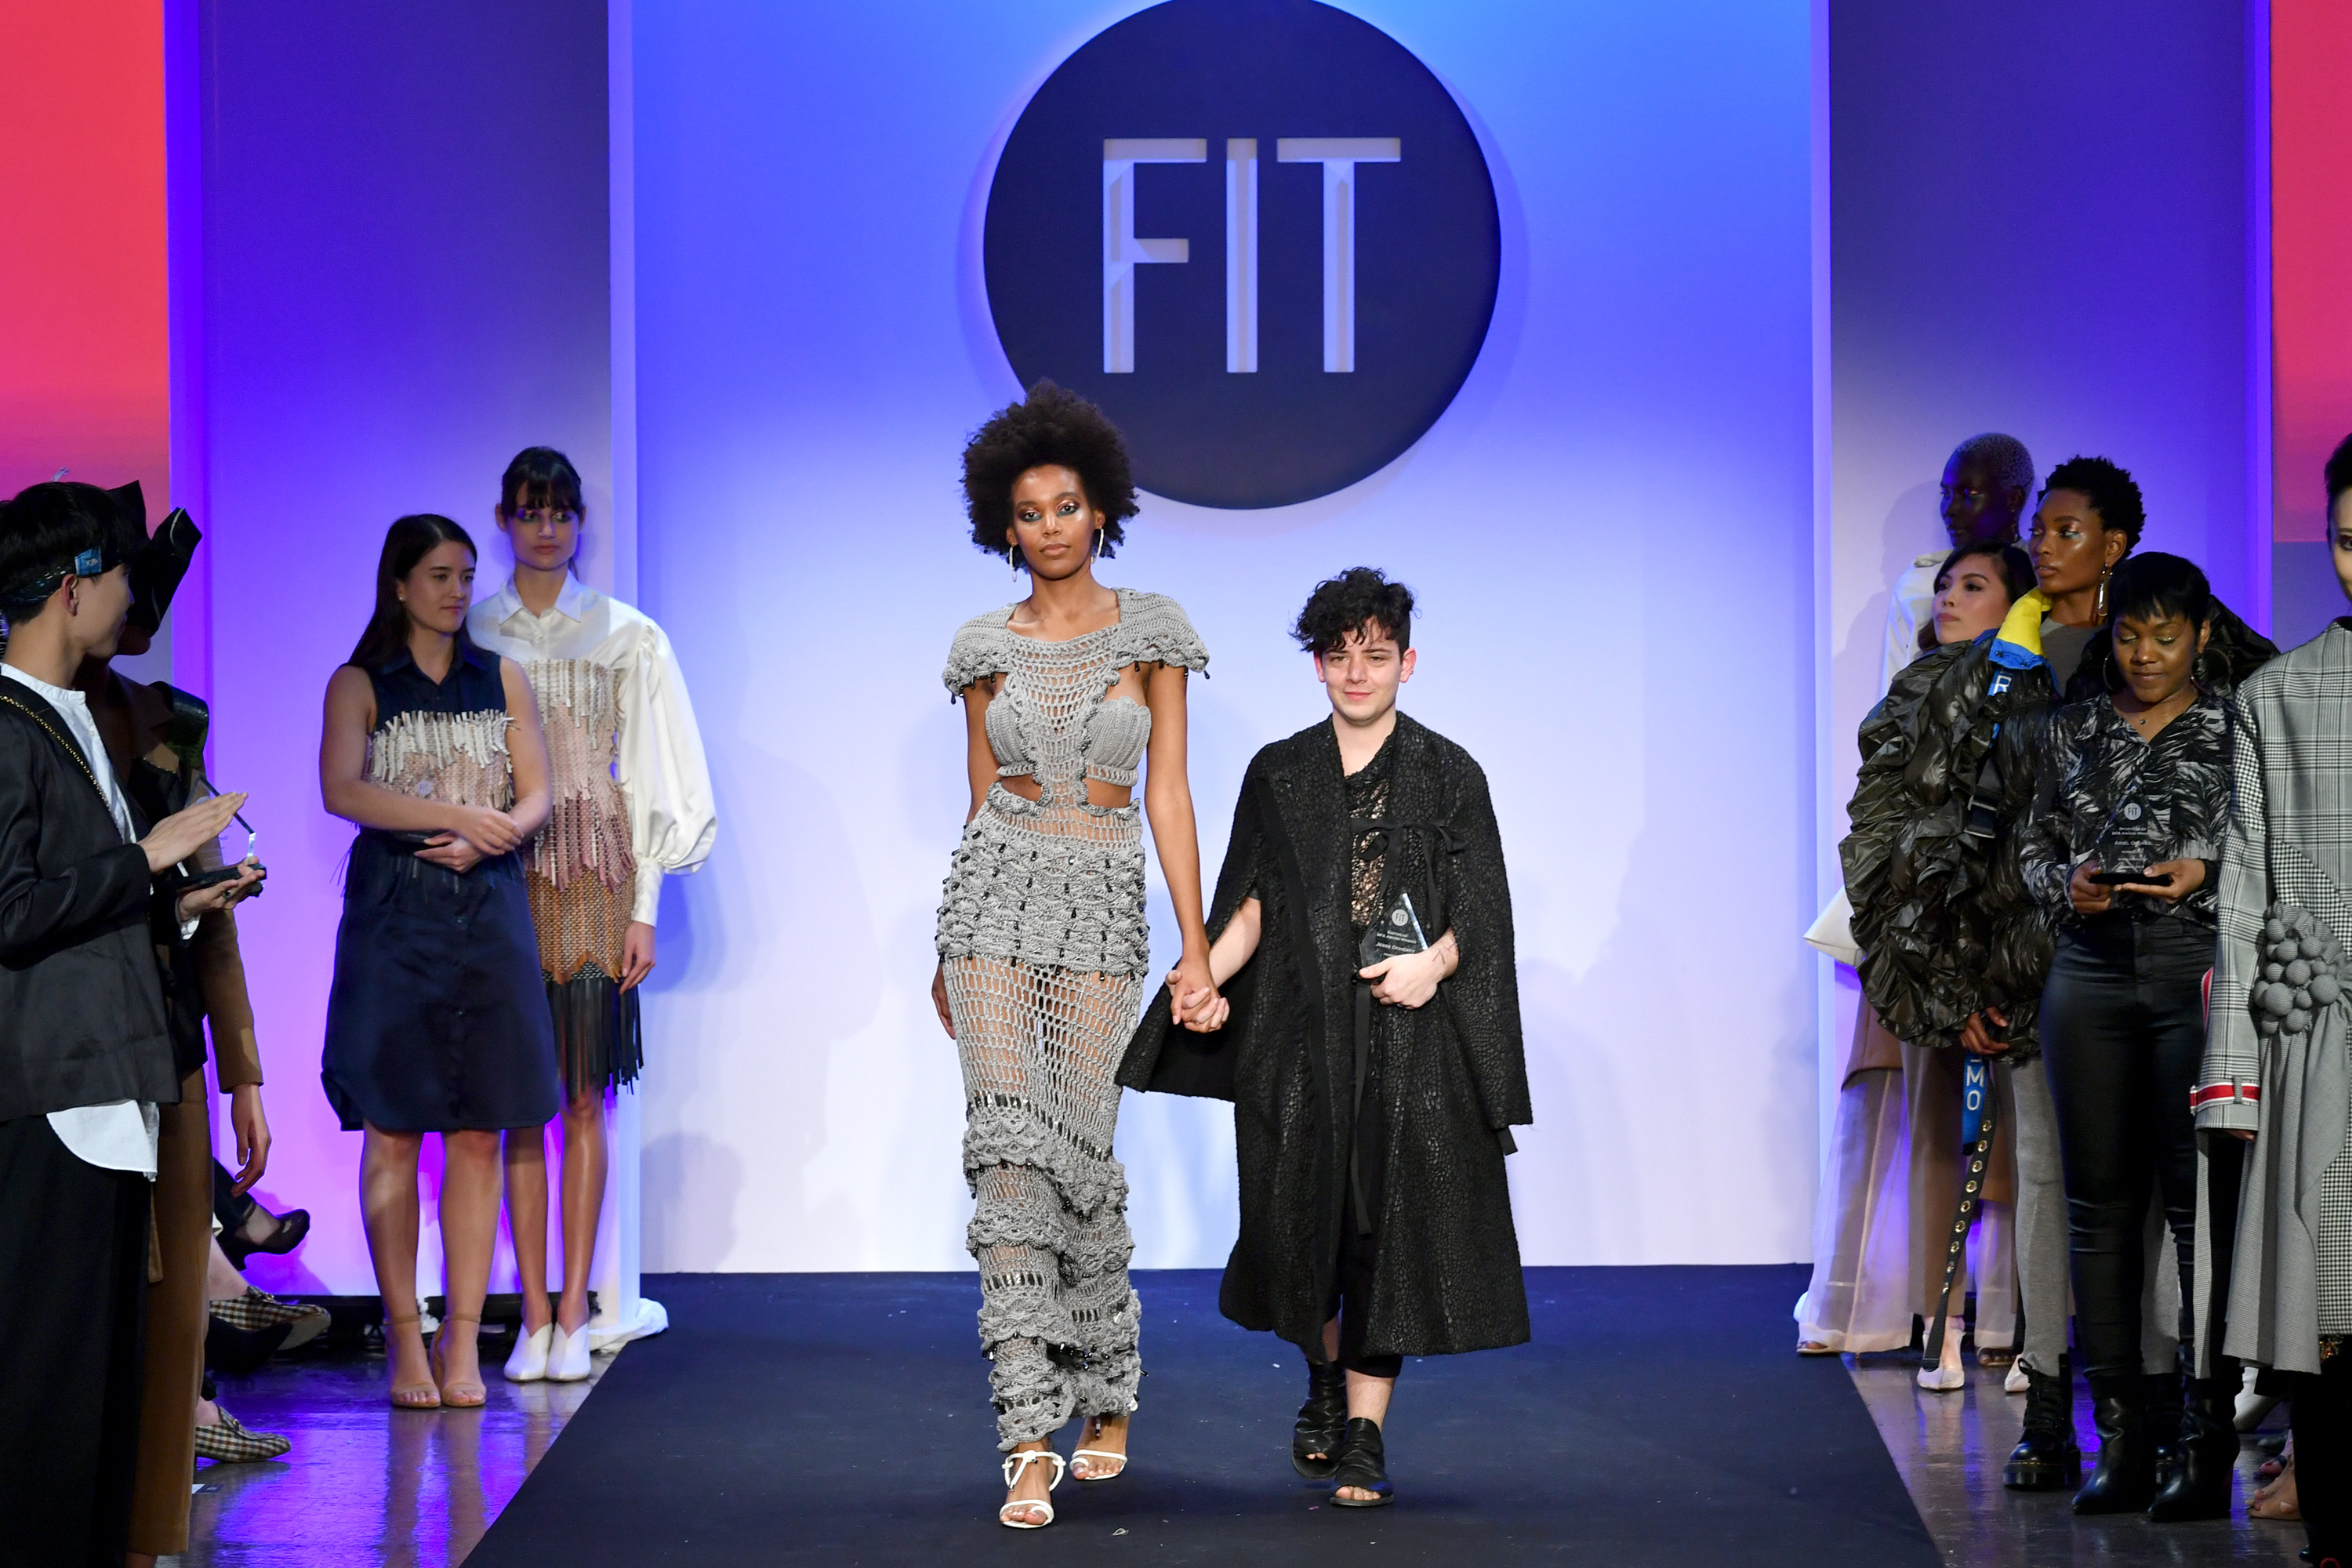 Future Of Fashion Show 2019 at the Fashion Institute of Technology